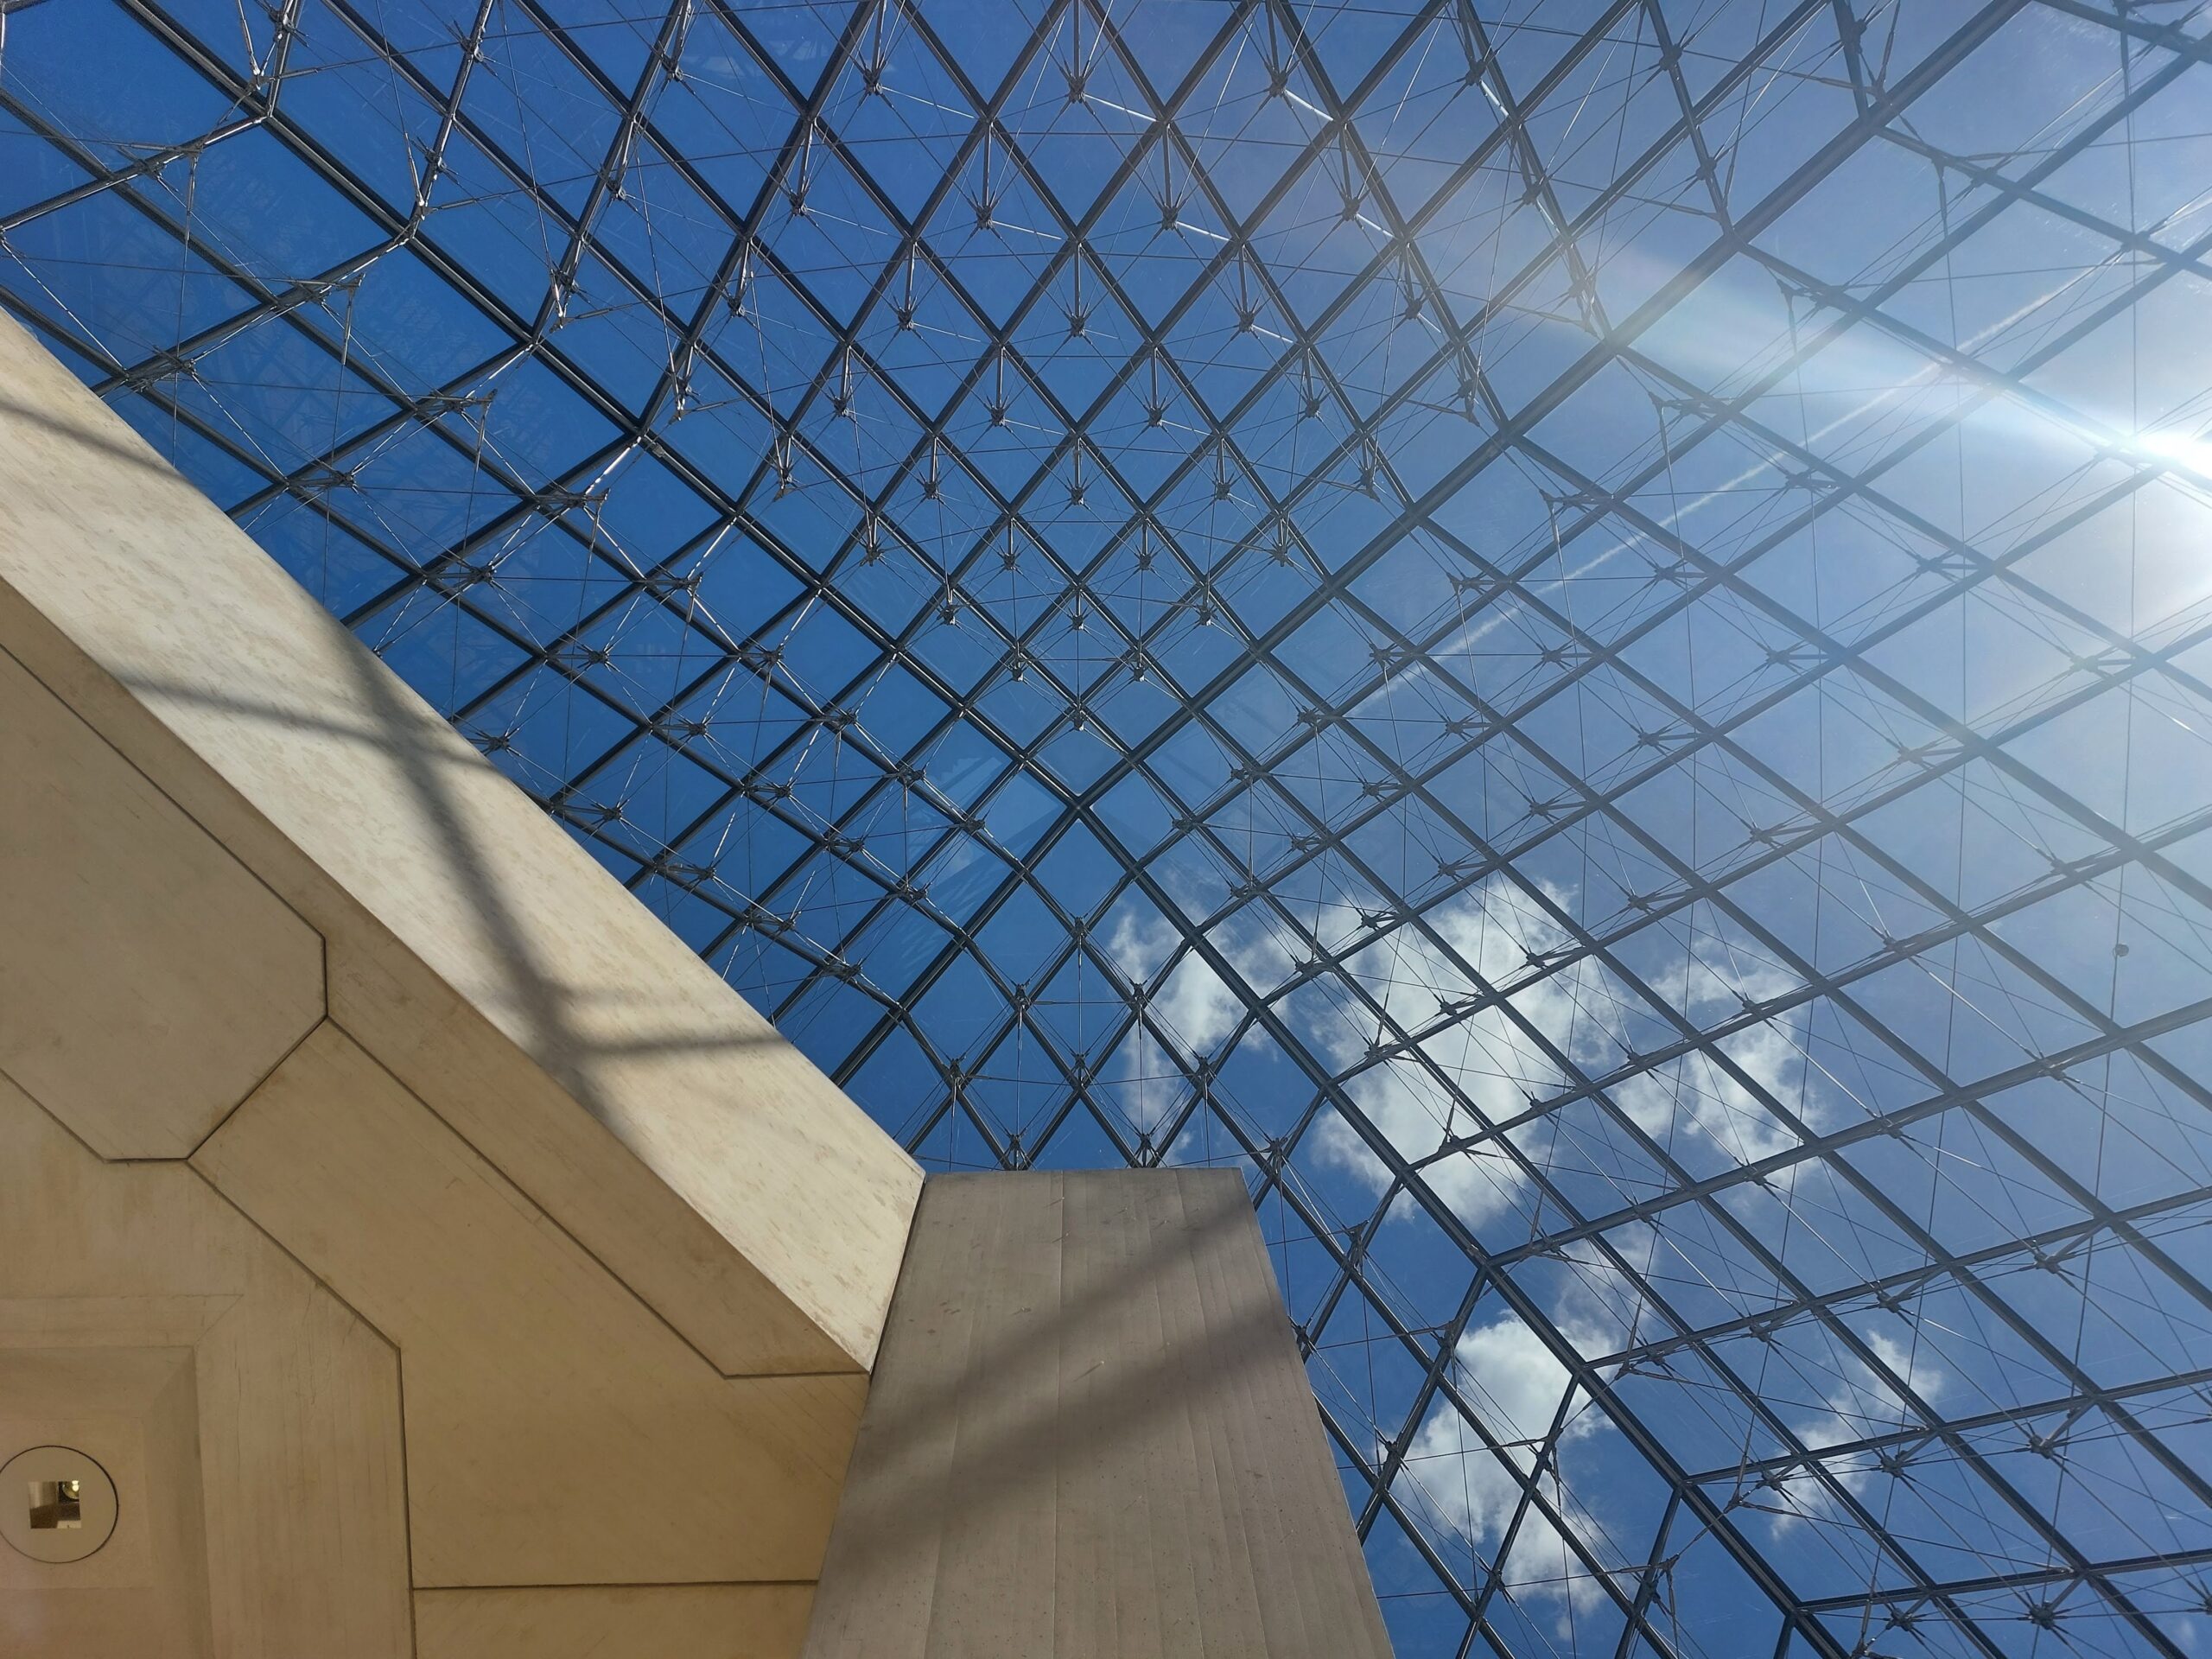 glass roof of the Louvre museum in Paris